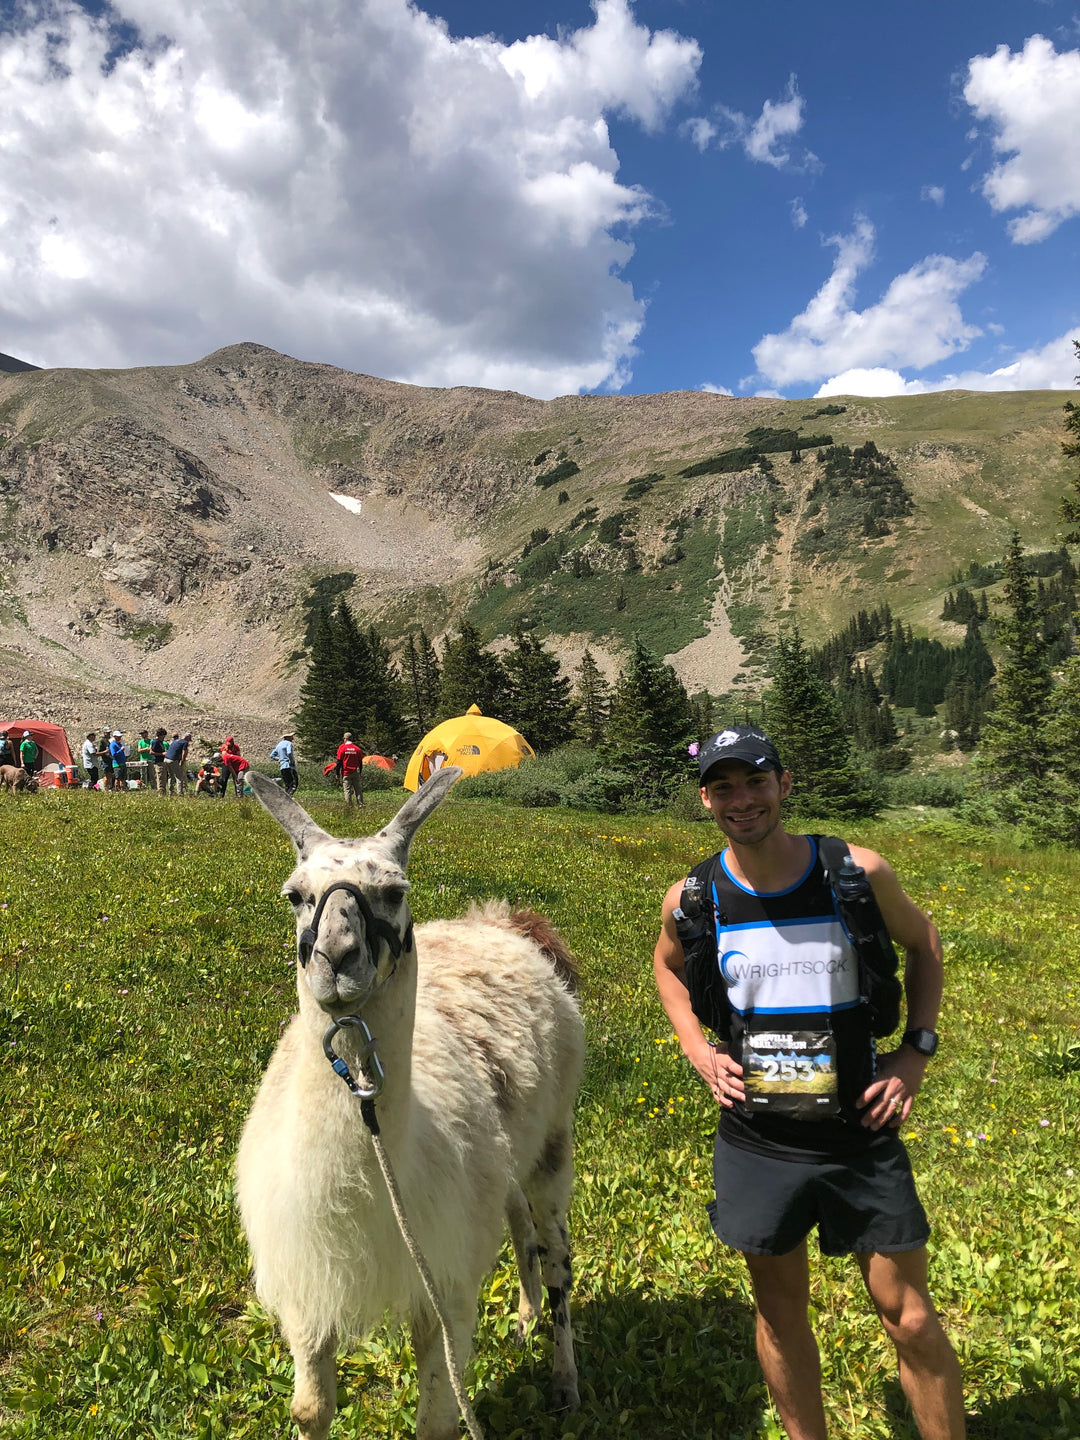 Trail runner with a llama in the mountains.